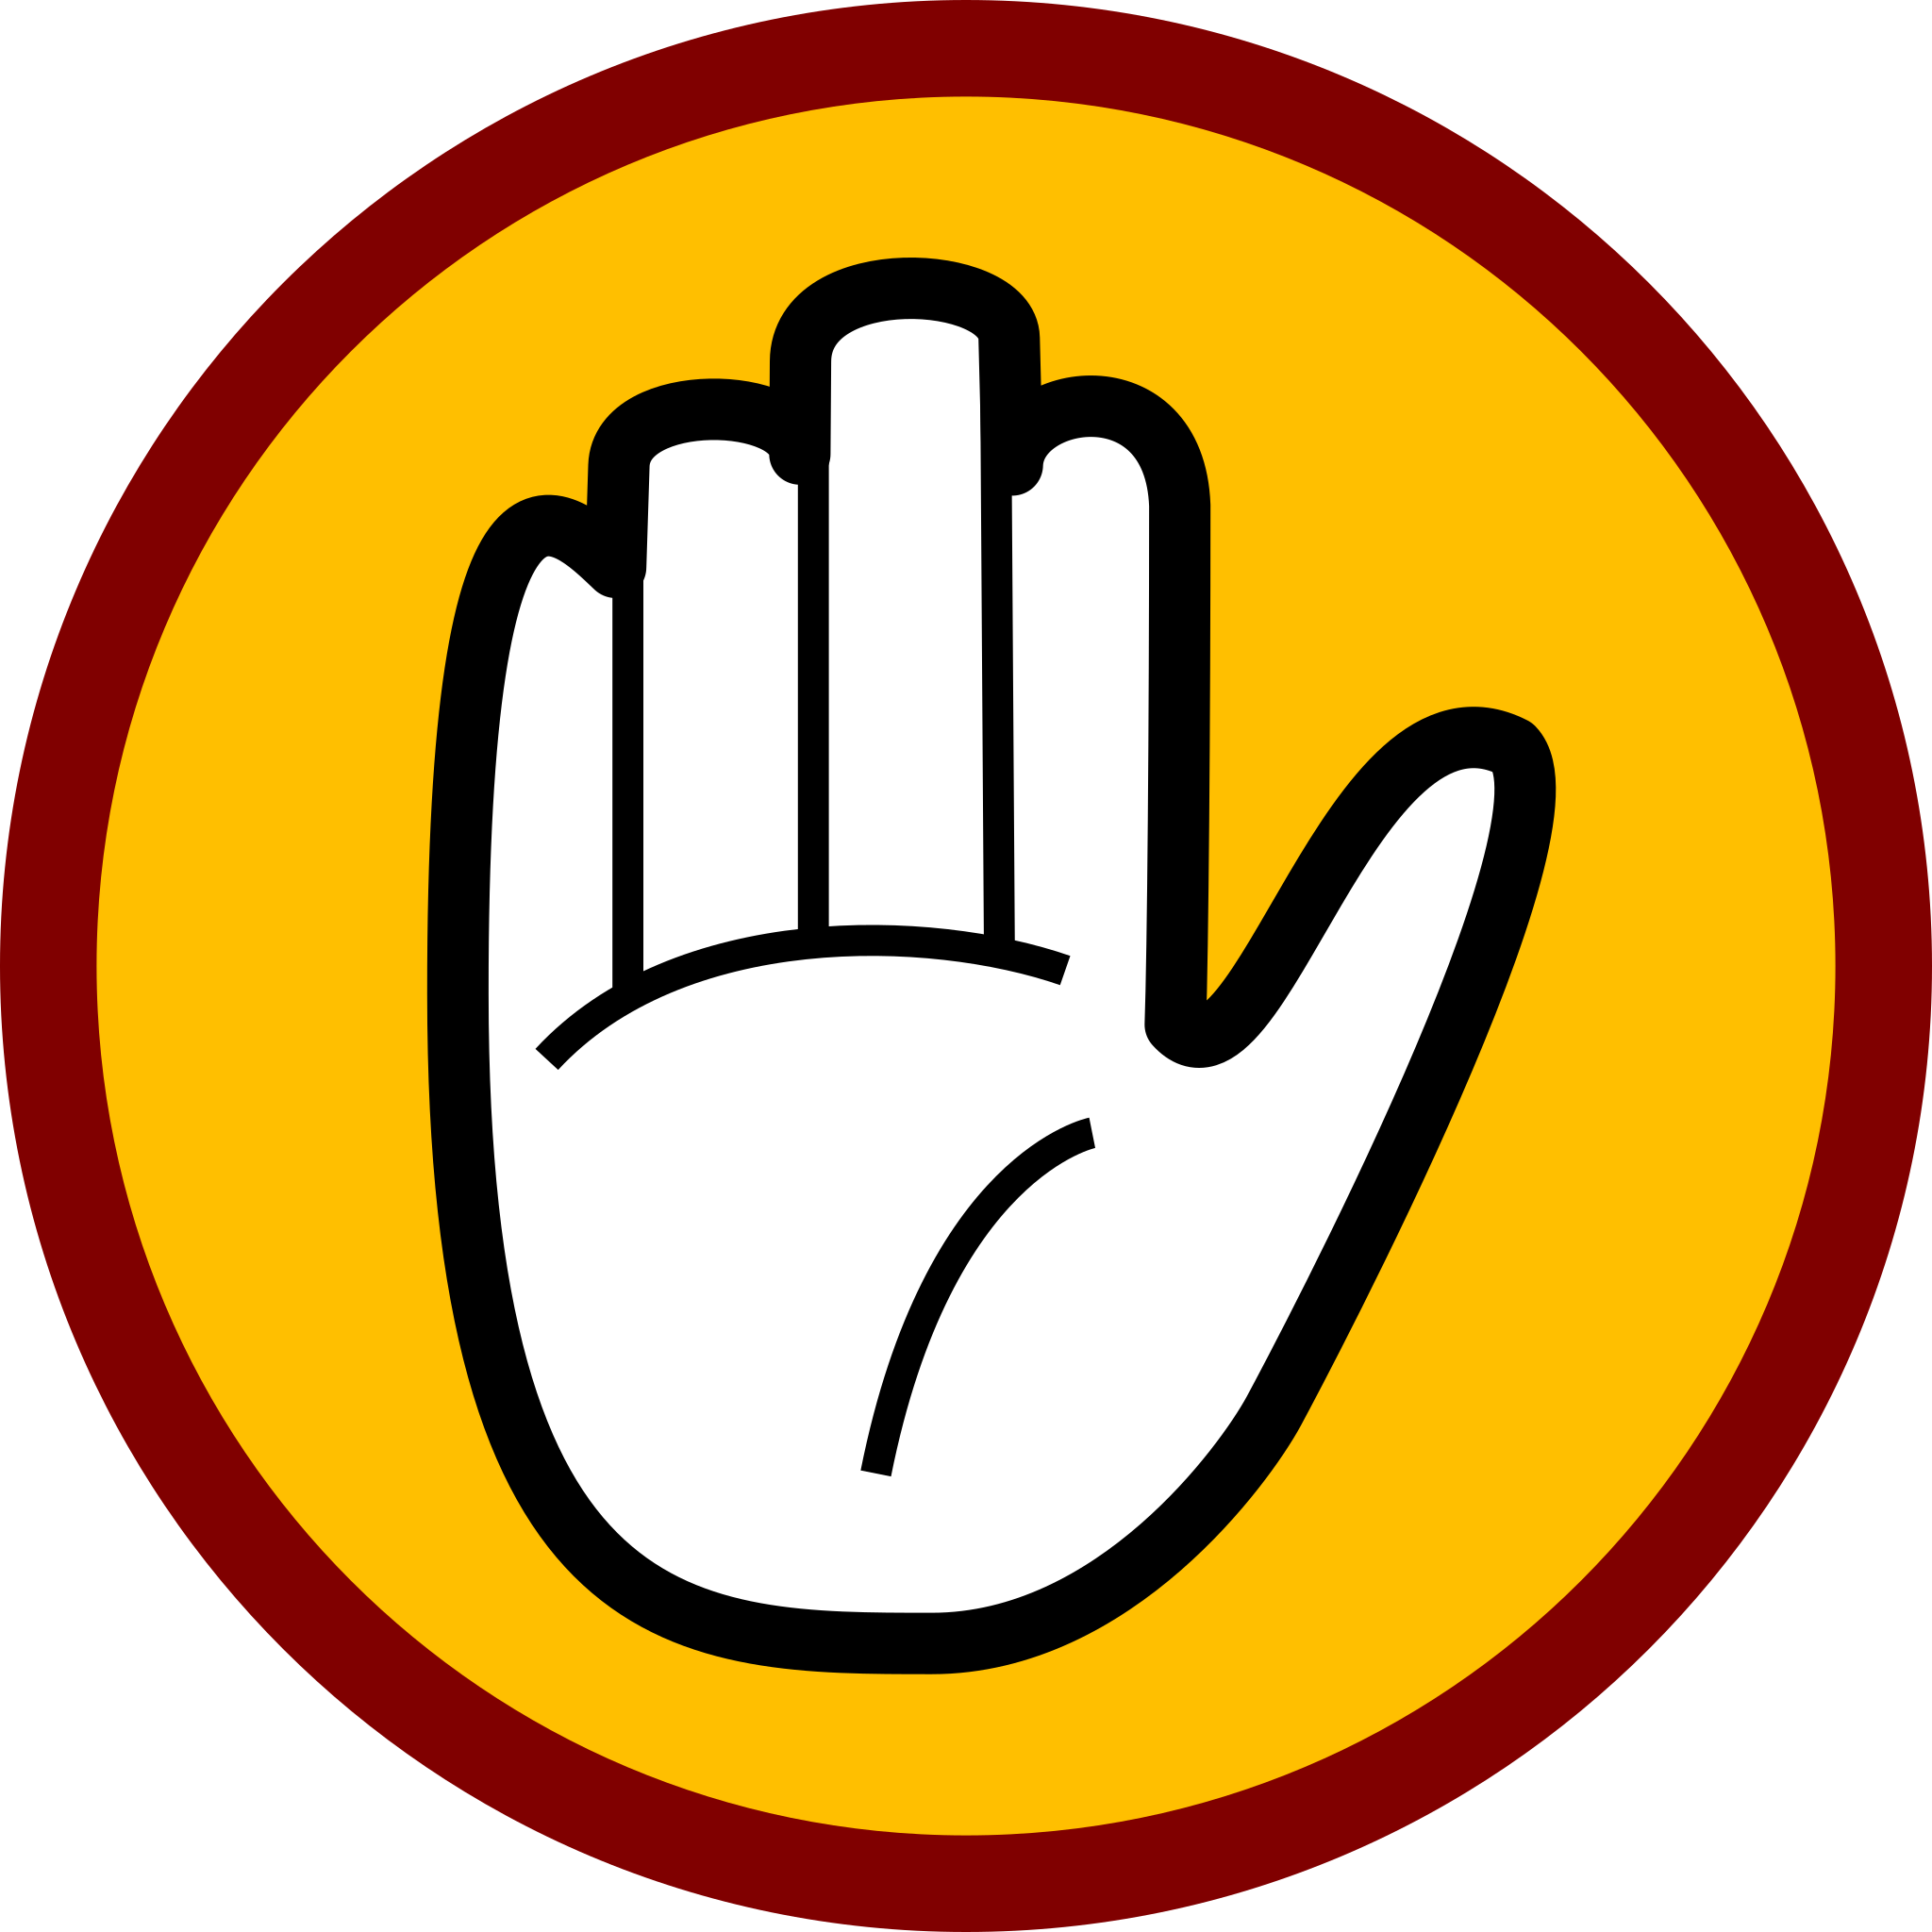 File:Stop hand caution.svg - Wikipedia